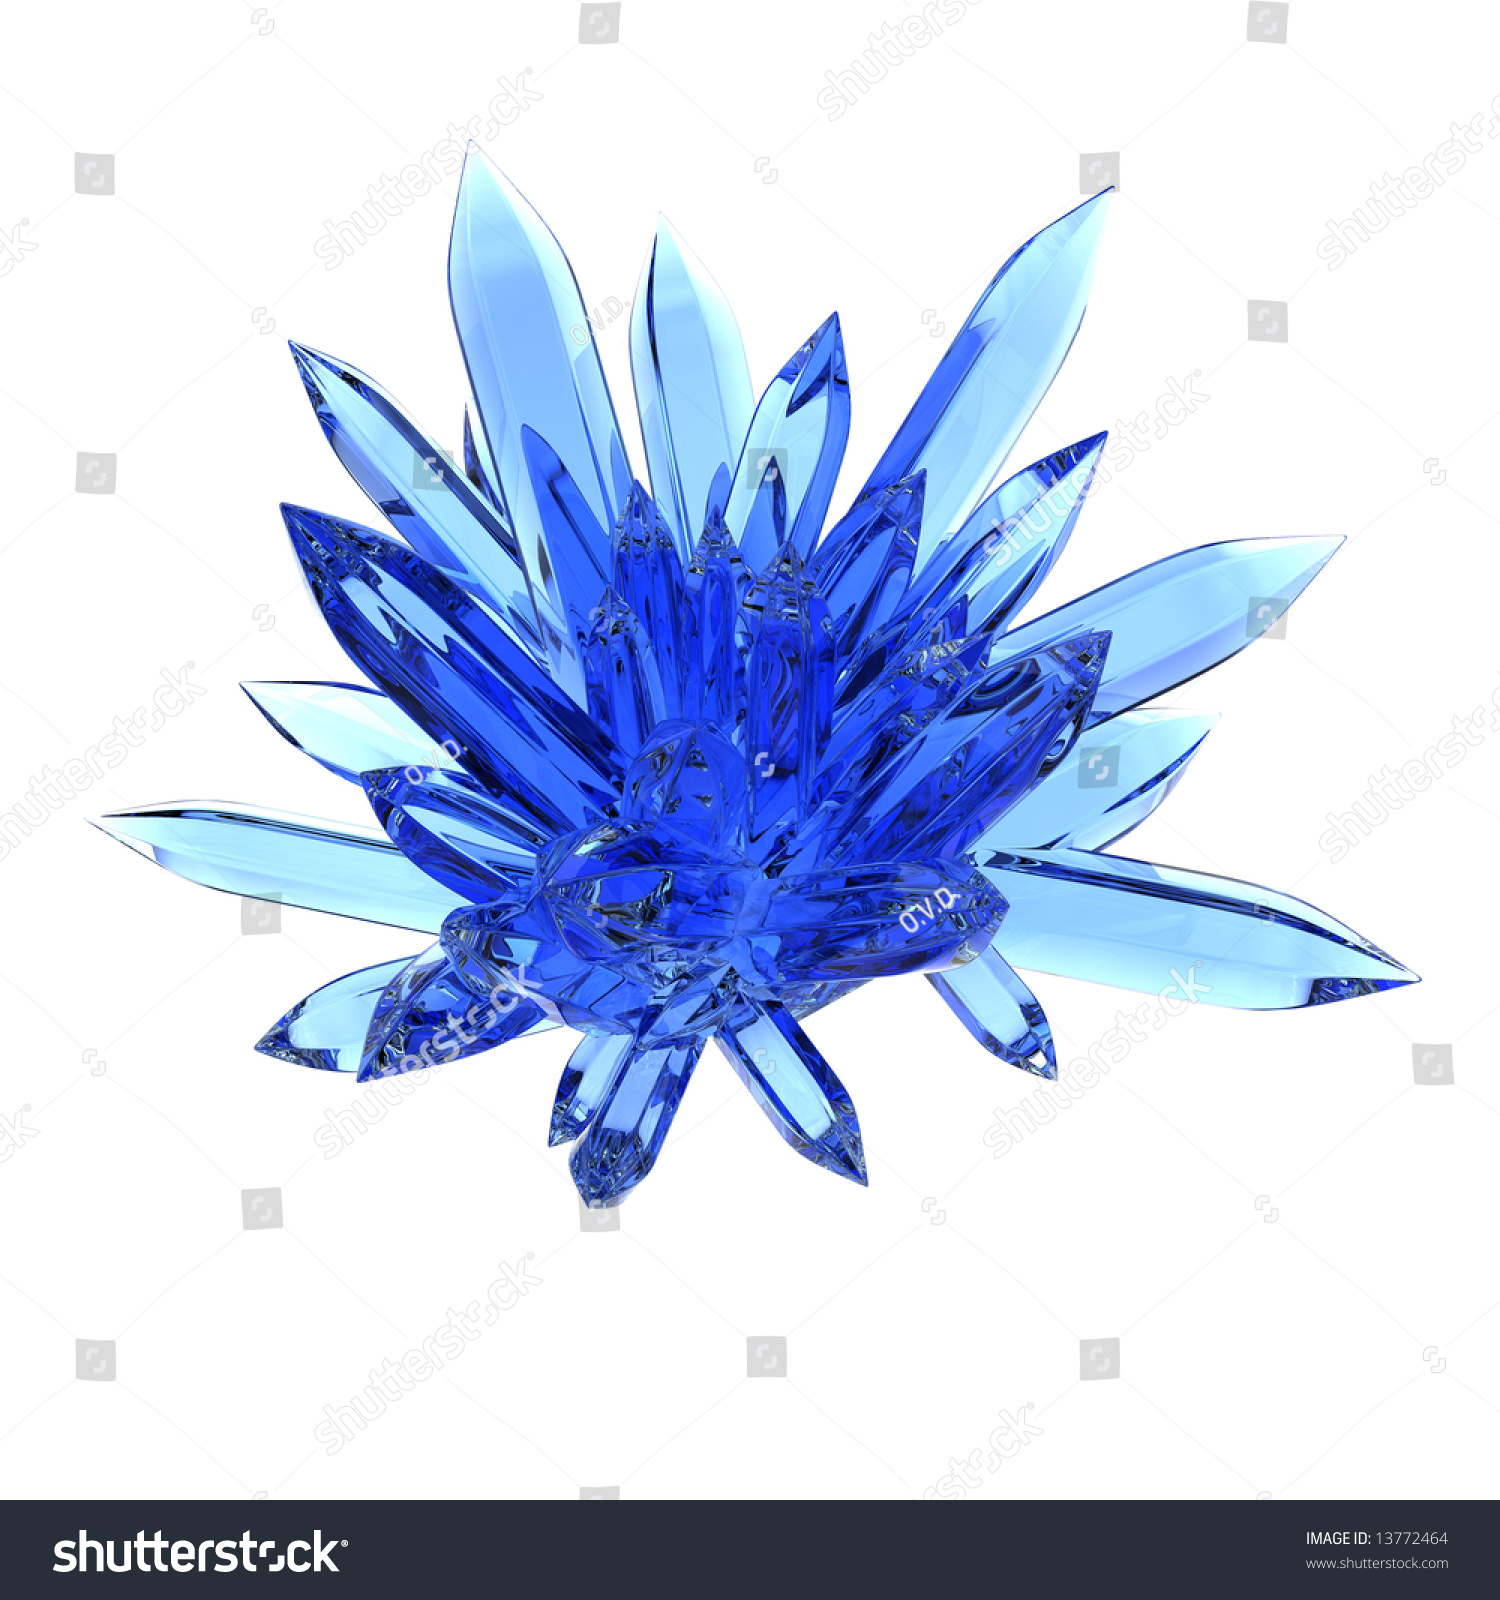 Blue Rock Crystal Isolated On White Stock Photo 13772464 : Shutterstock